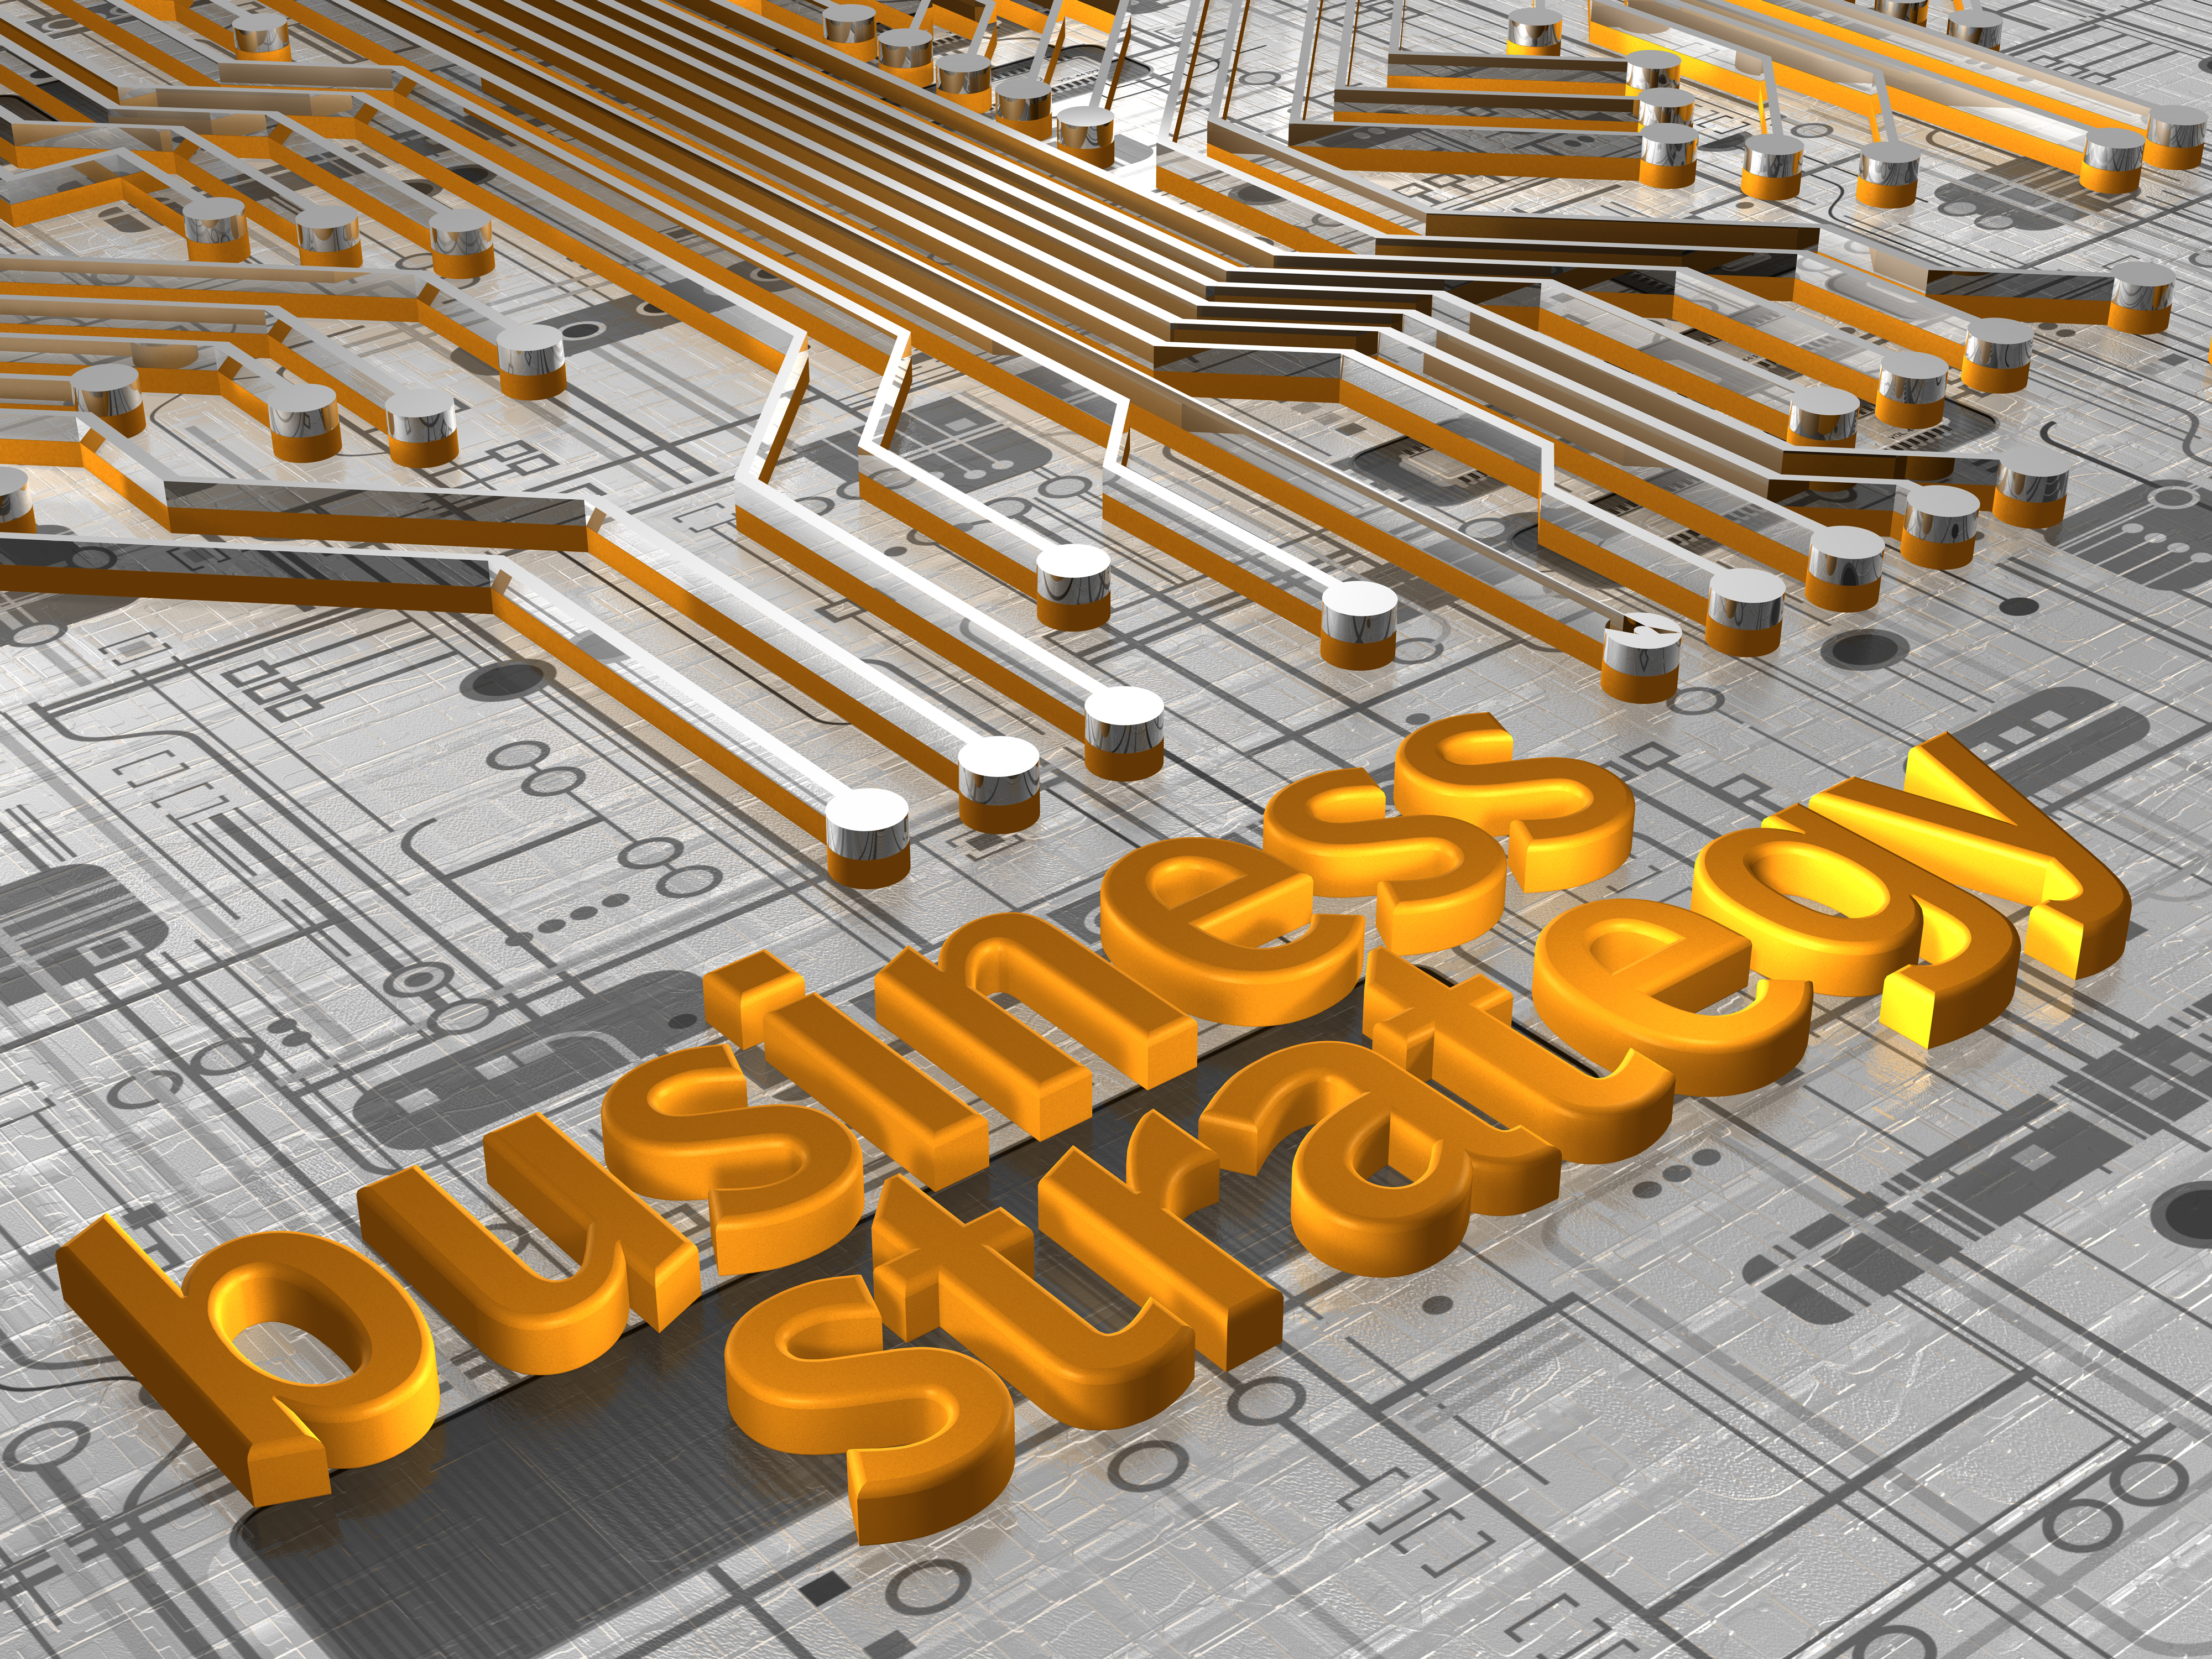 Illustration about business concepts - Business Strategy - 3D